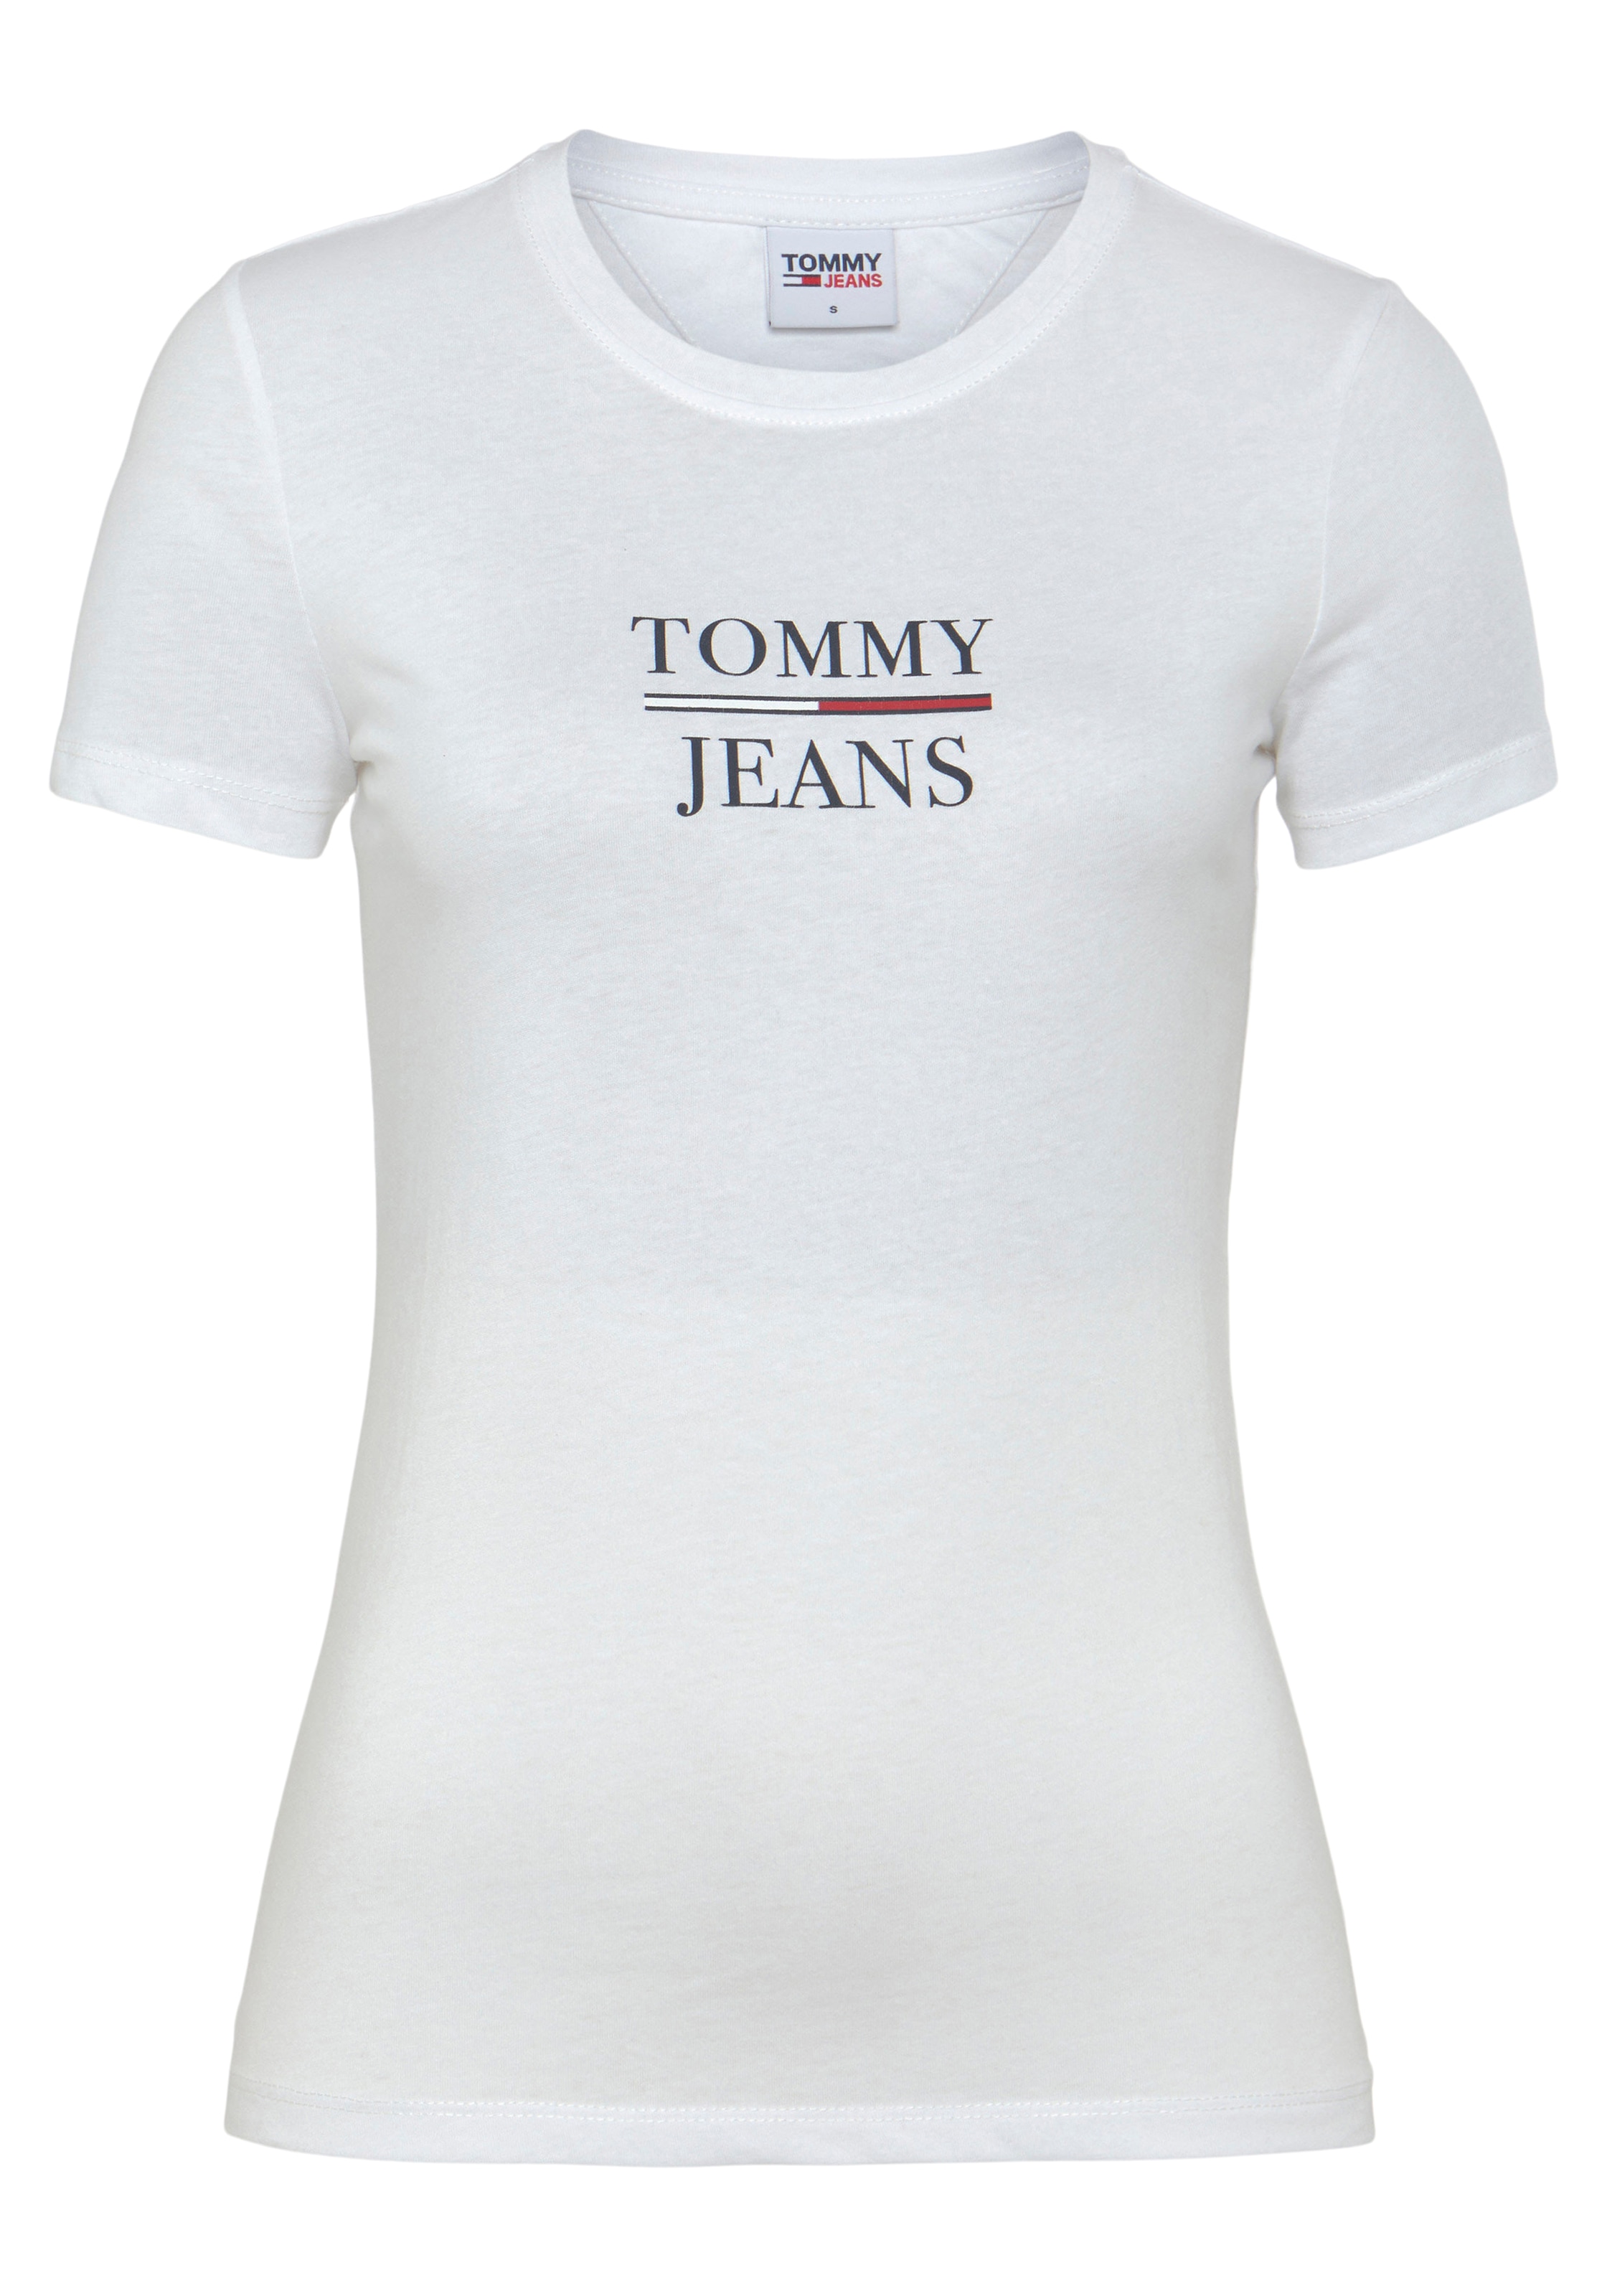 Tommy Jeans T-Shirt (Packung, ♕ T TOMMY ESS bei SS«, Skinny 2er-Pack) »TJW 2PACK